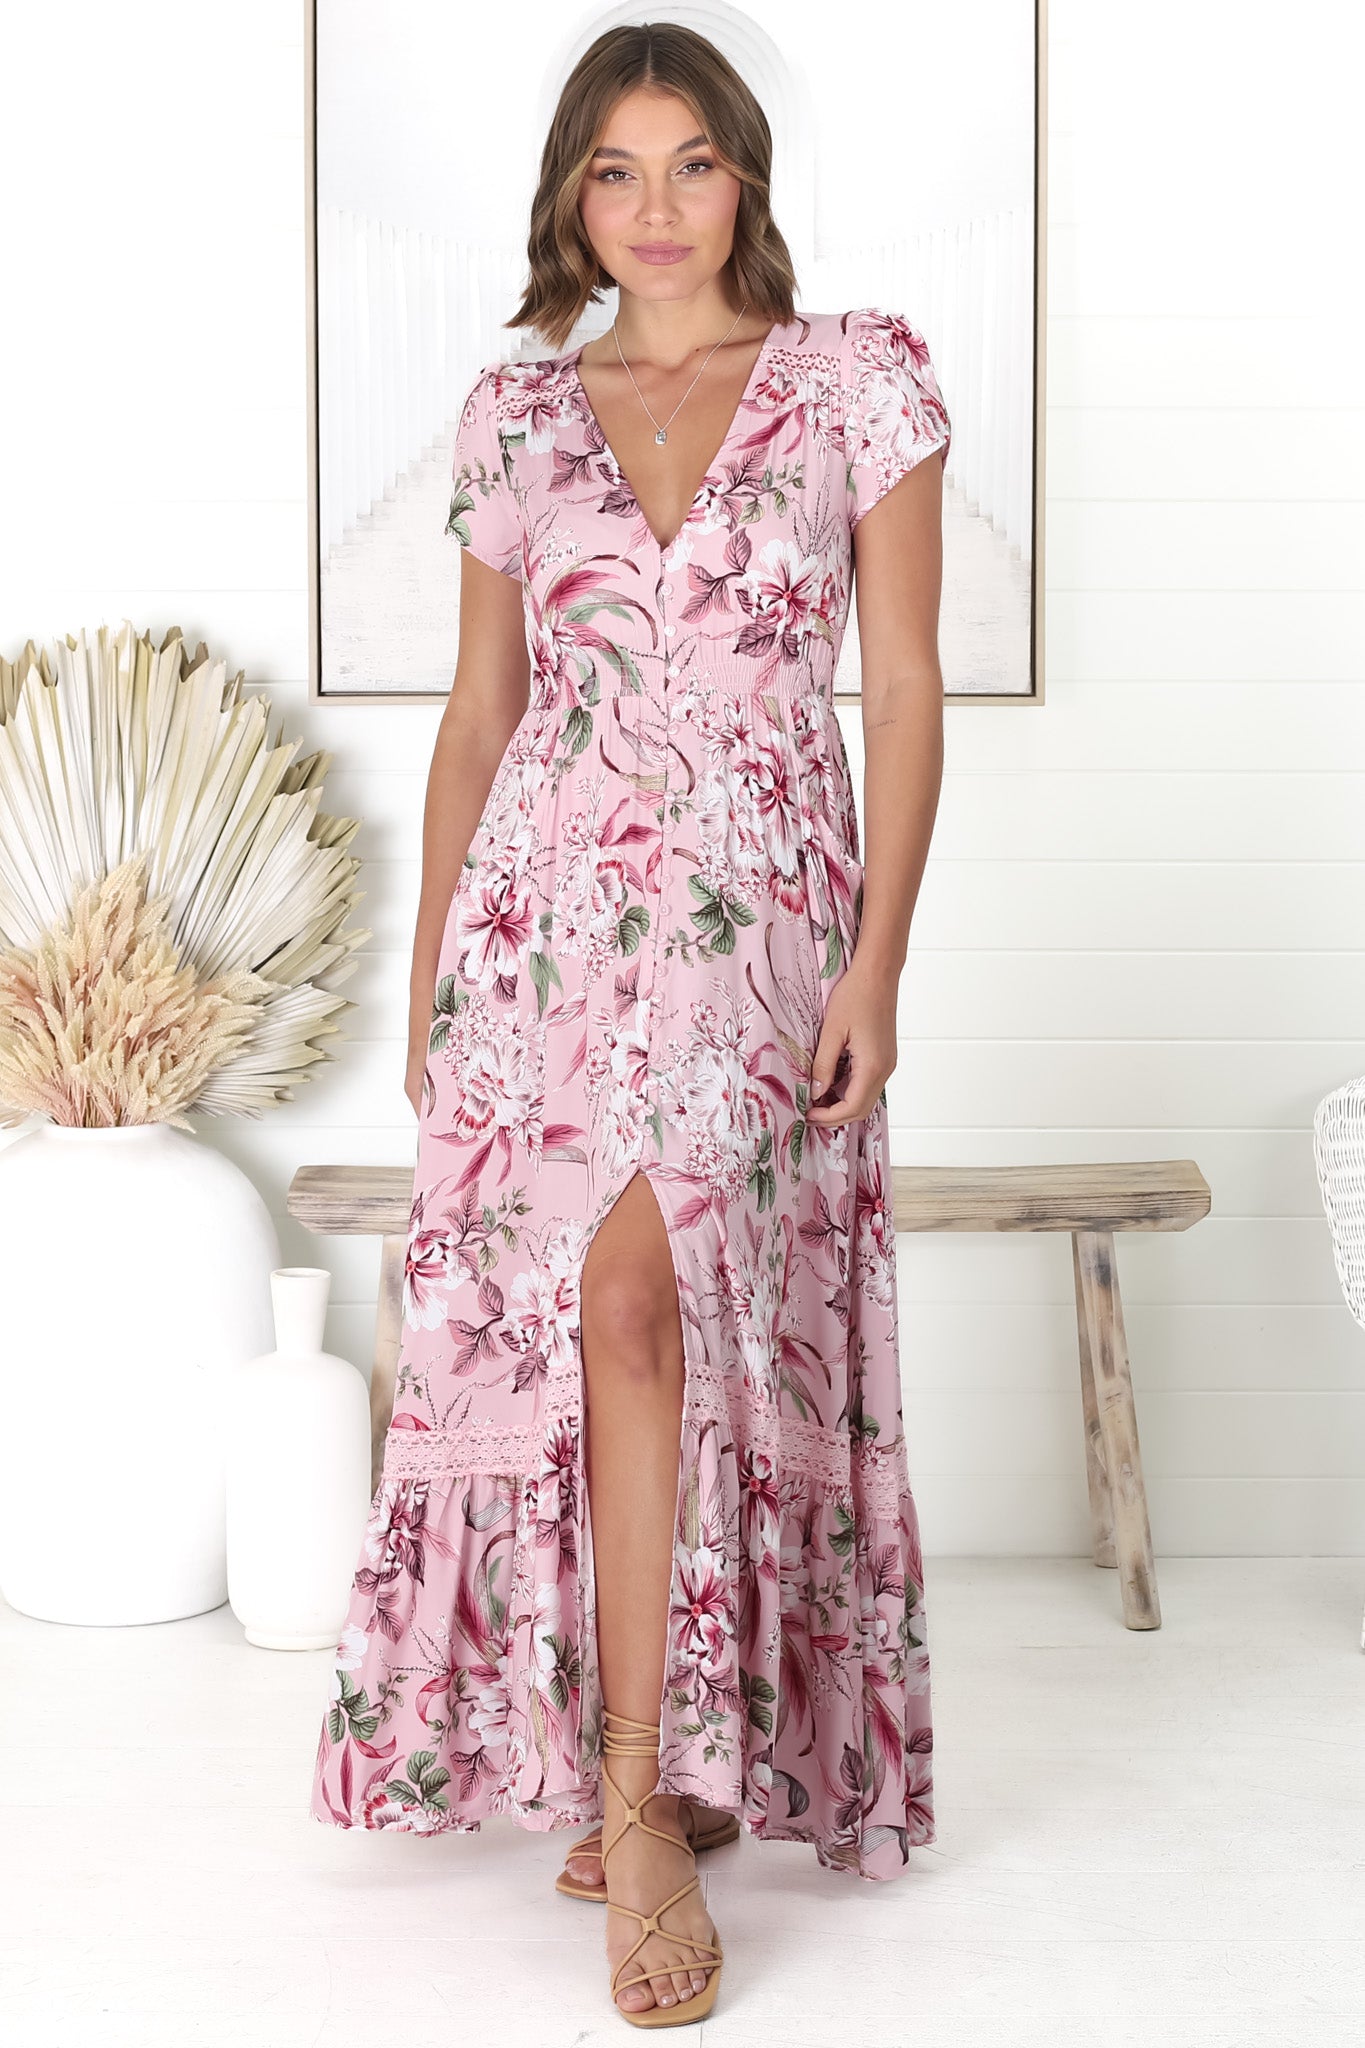 JAASE - Carmen Maxi Dress: Butterfly Cap Sleeve Button Down A Line Dress with Lace Trim in Pink Lotus Print